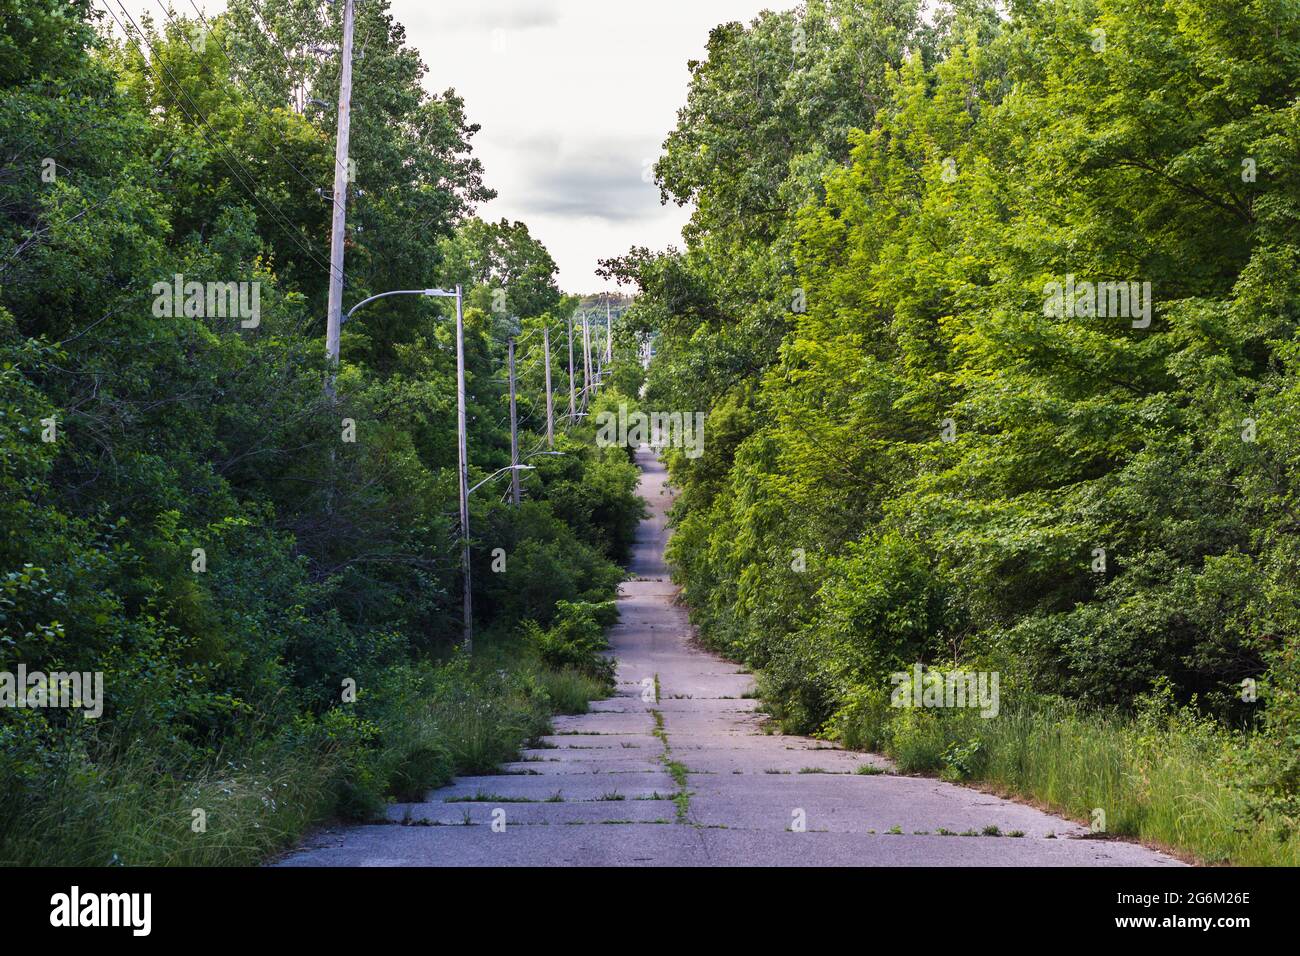 Nature and a forest of trees reclaiming an old, cracked, unmaintained hilly road that is lined with streetlights. Stock Photo